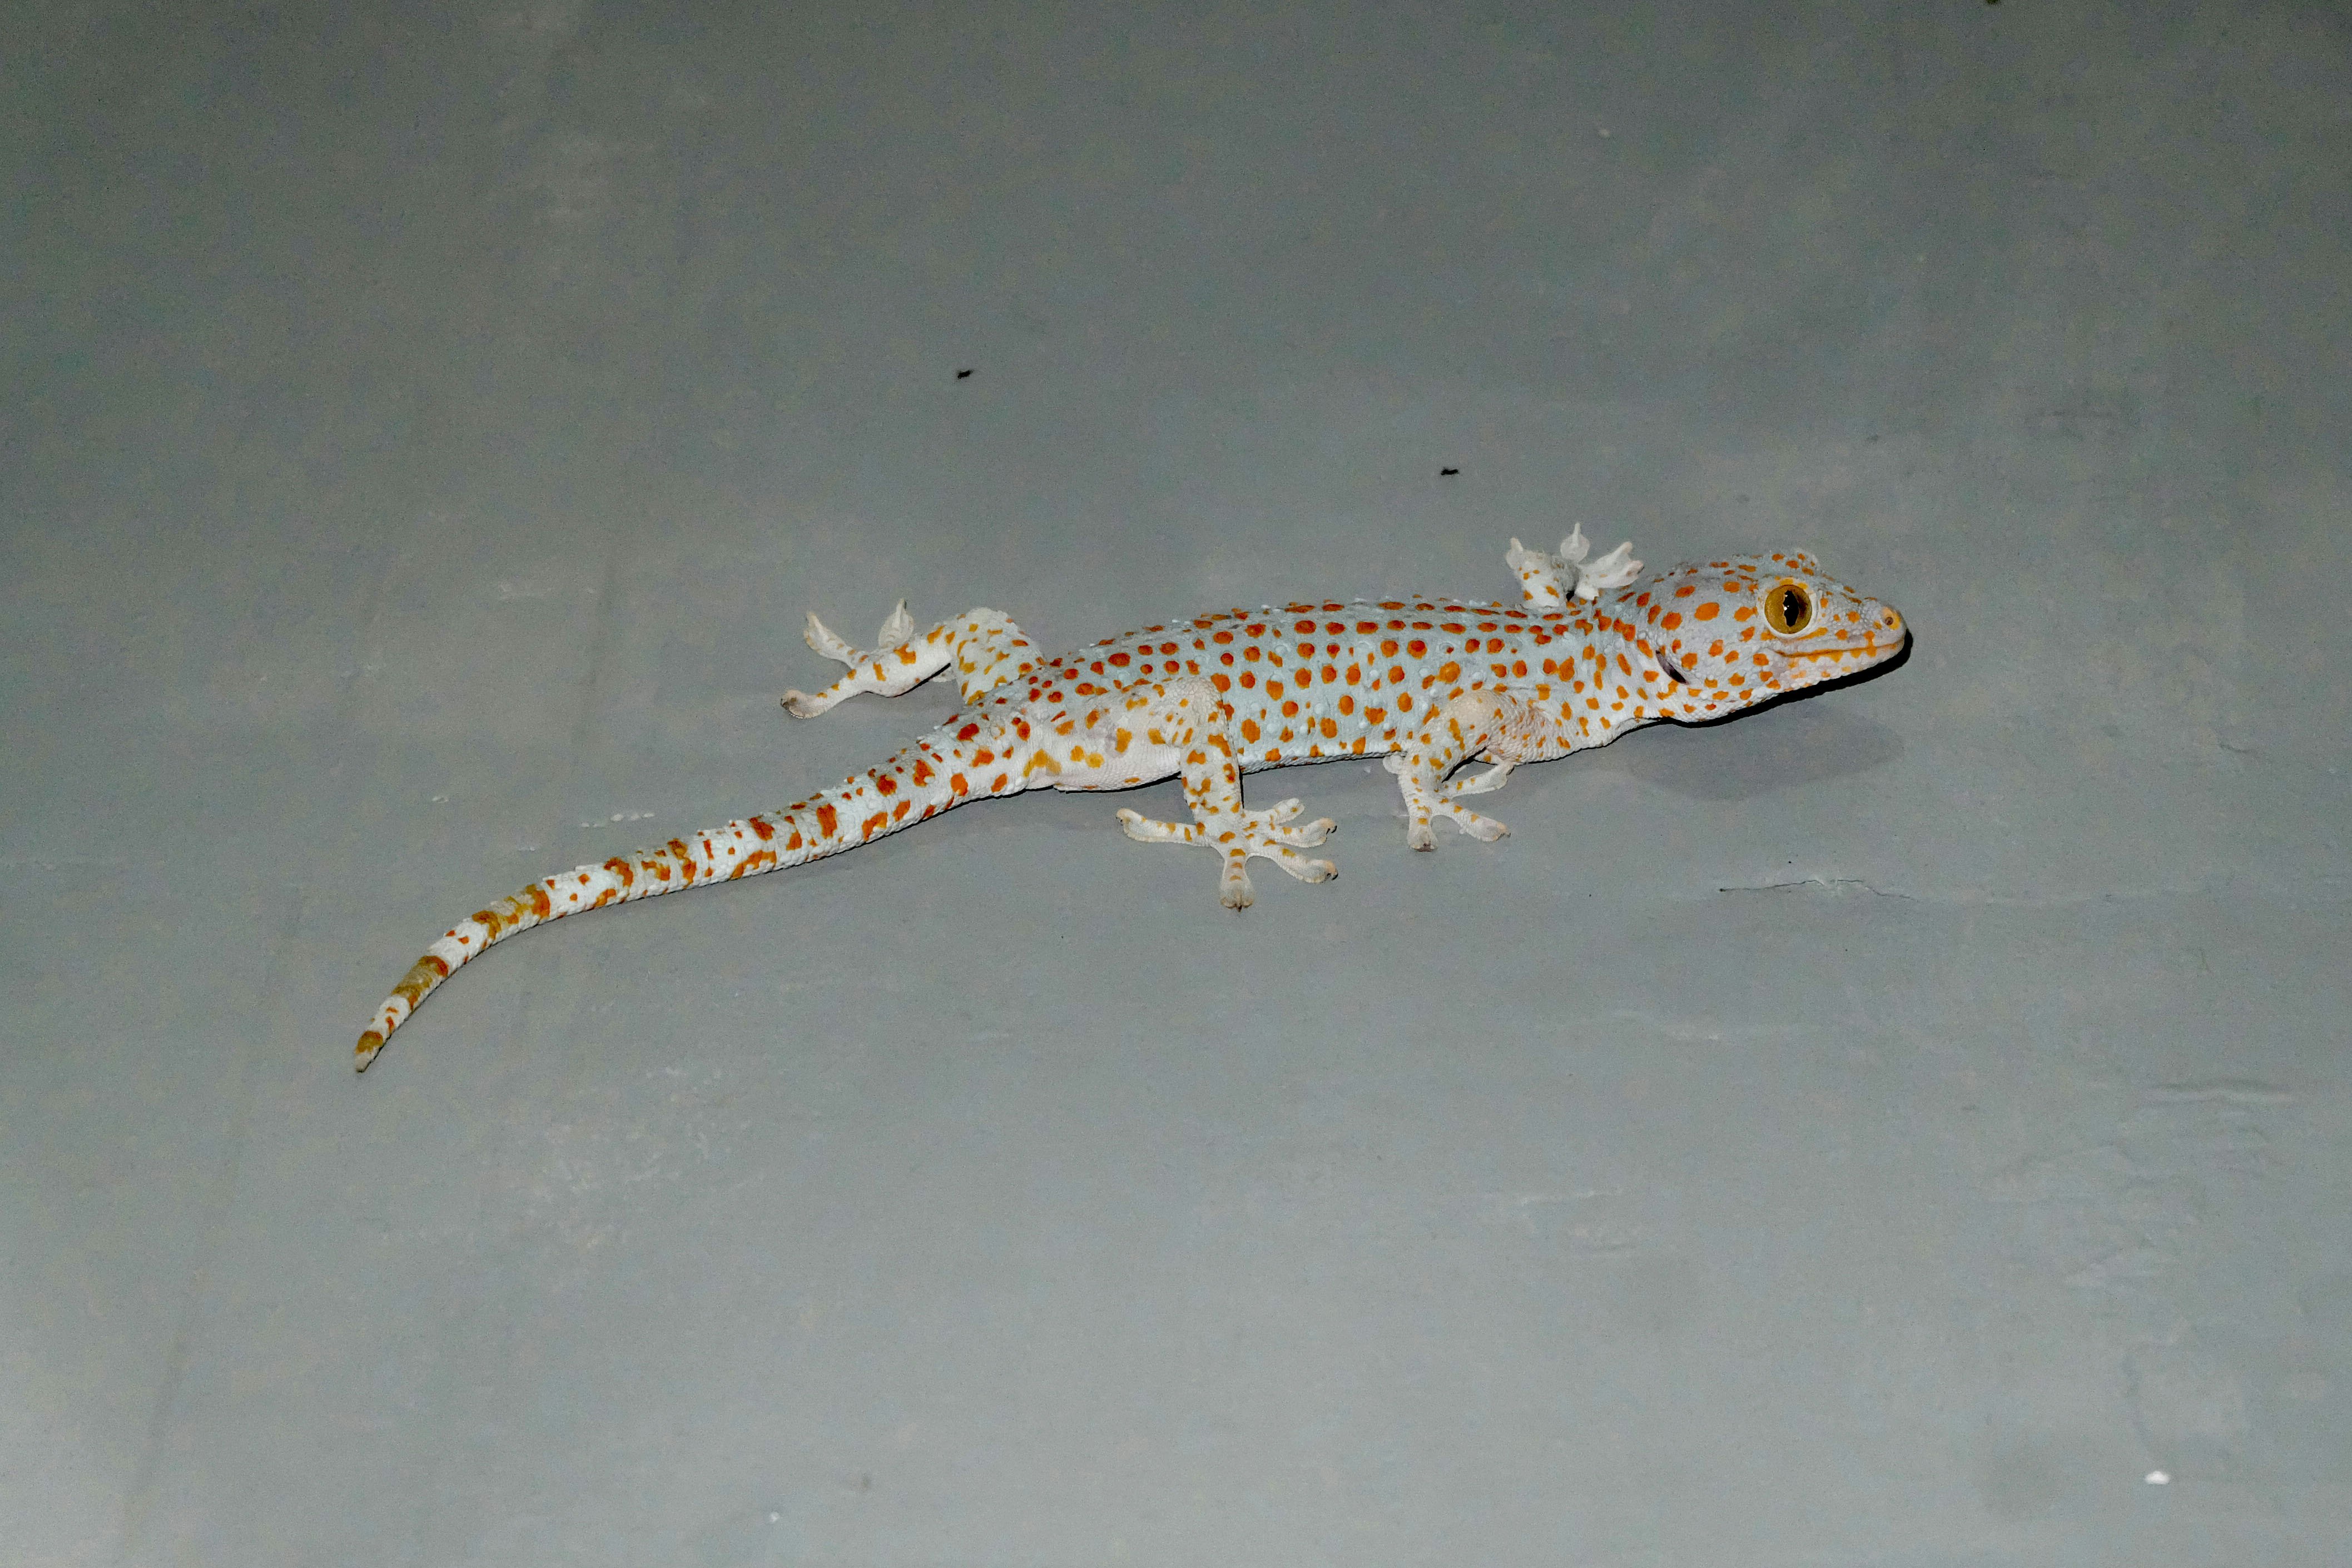 A common gecko in Indonesia. Notorious for its loud sound. "TOK..KEK! TOK..KEK!". I think it worth a lot because their tails are deemed to have medicinal properties by some Indonesians.